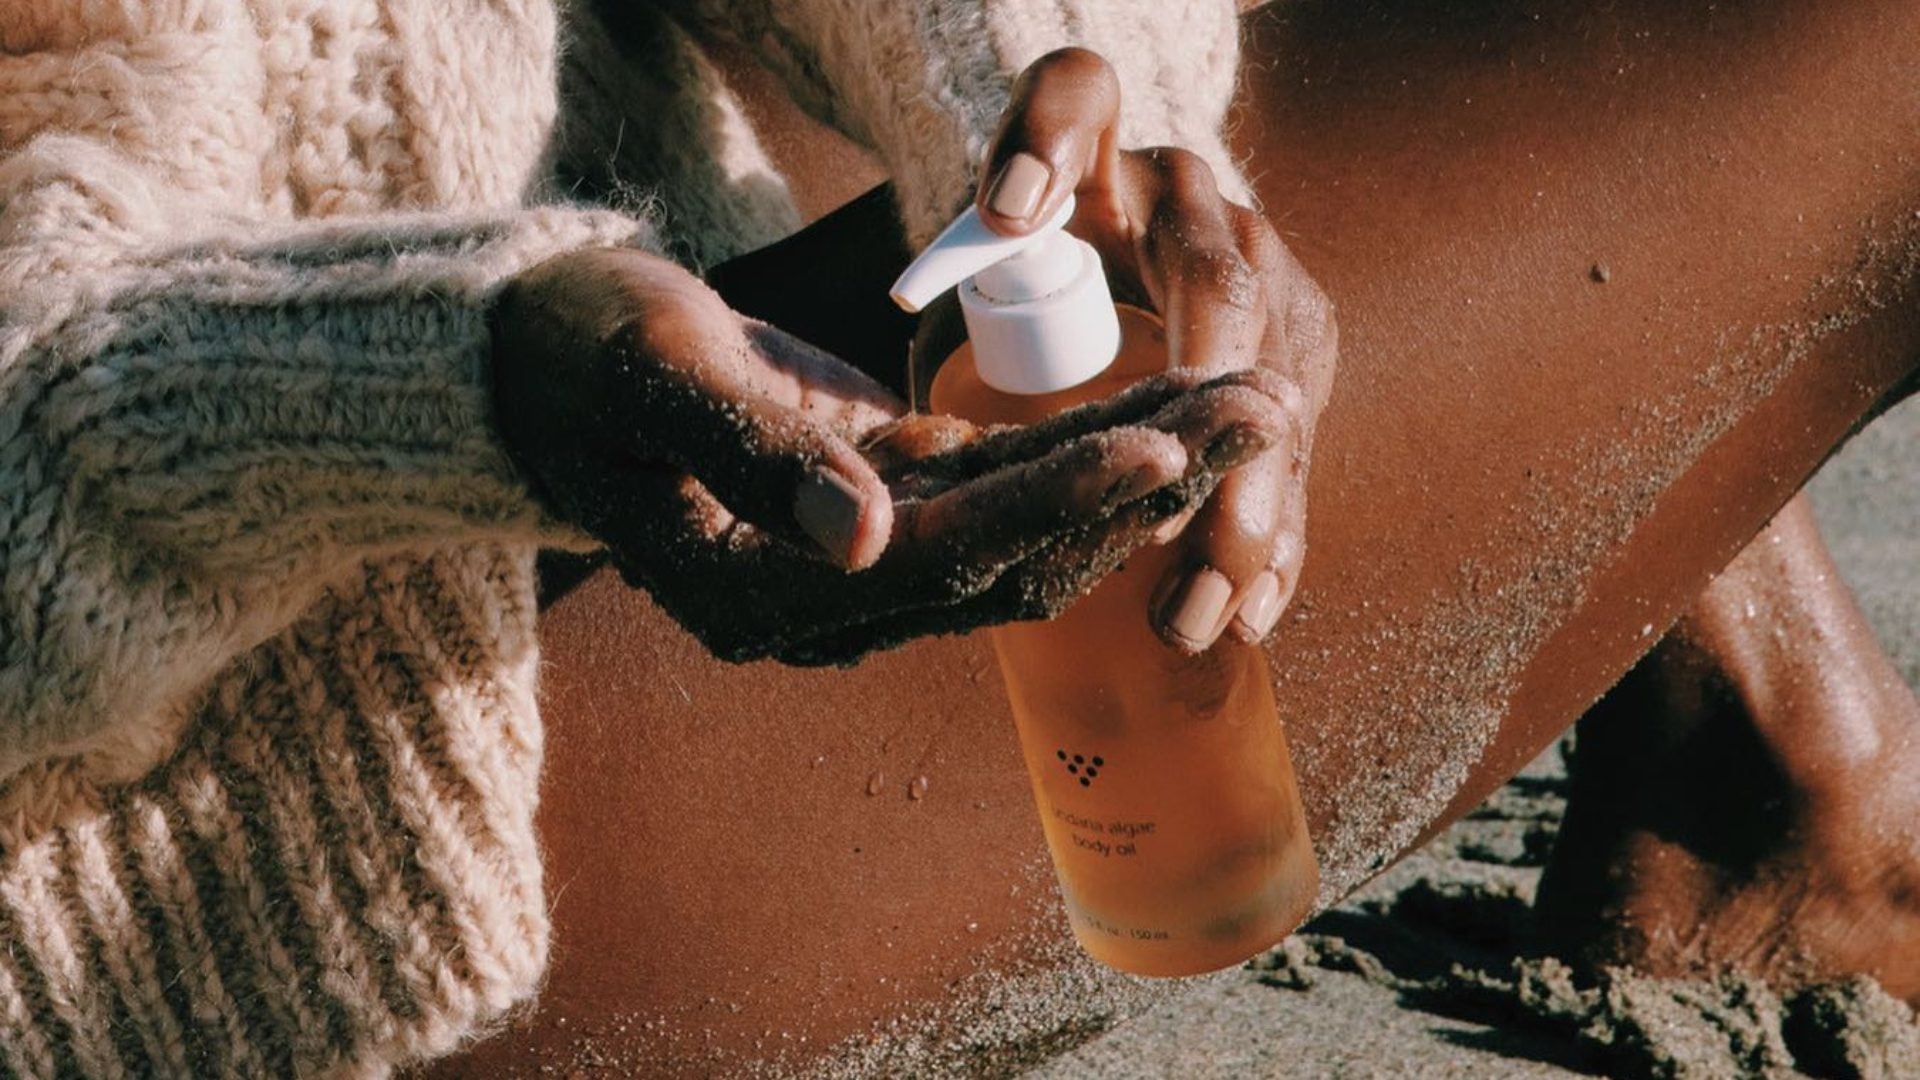 According To Reviews, These 10 Body Oils Will Keep Dry Skin Glowy And Hydrated